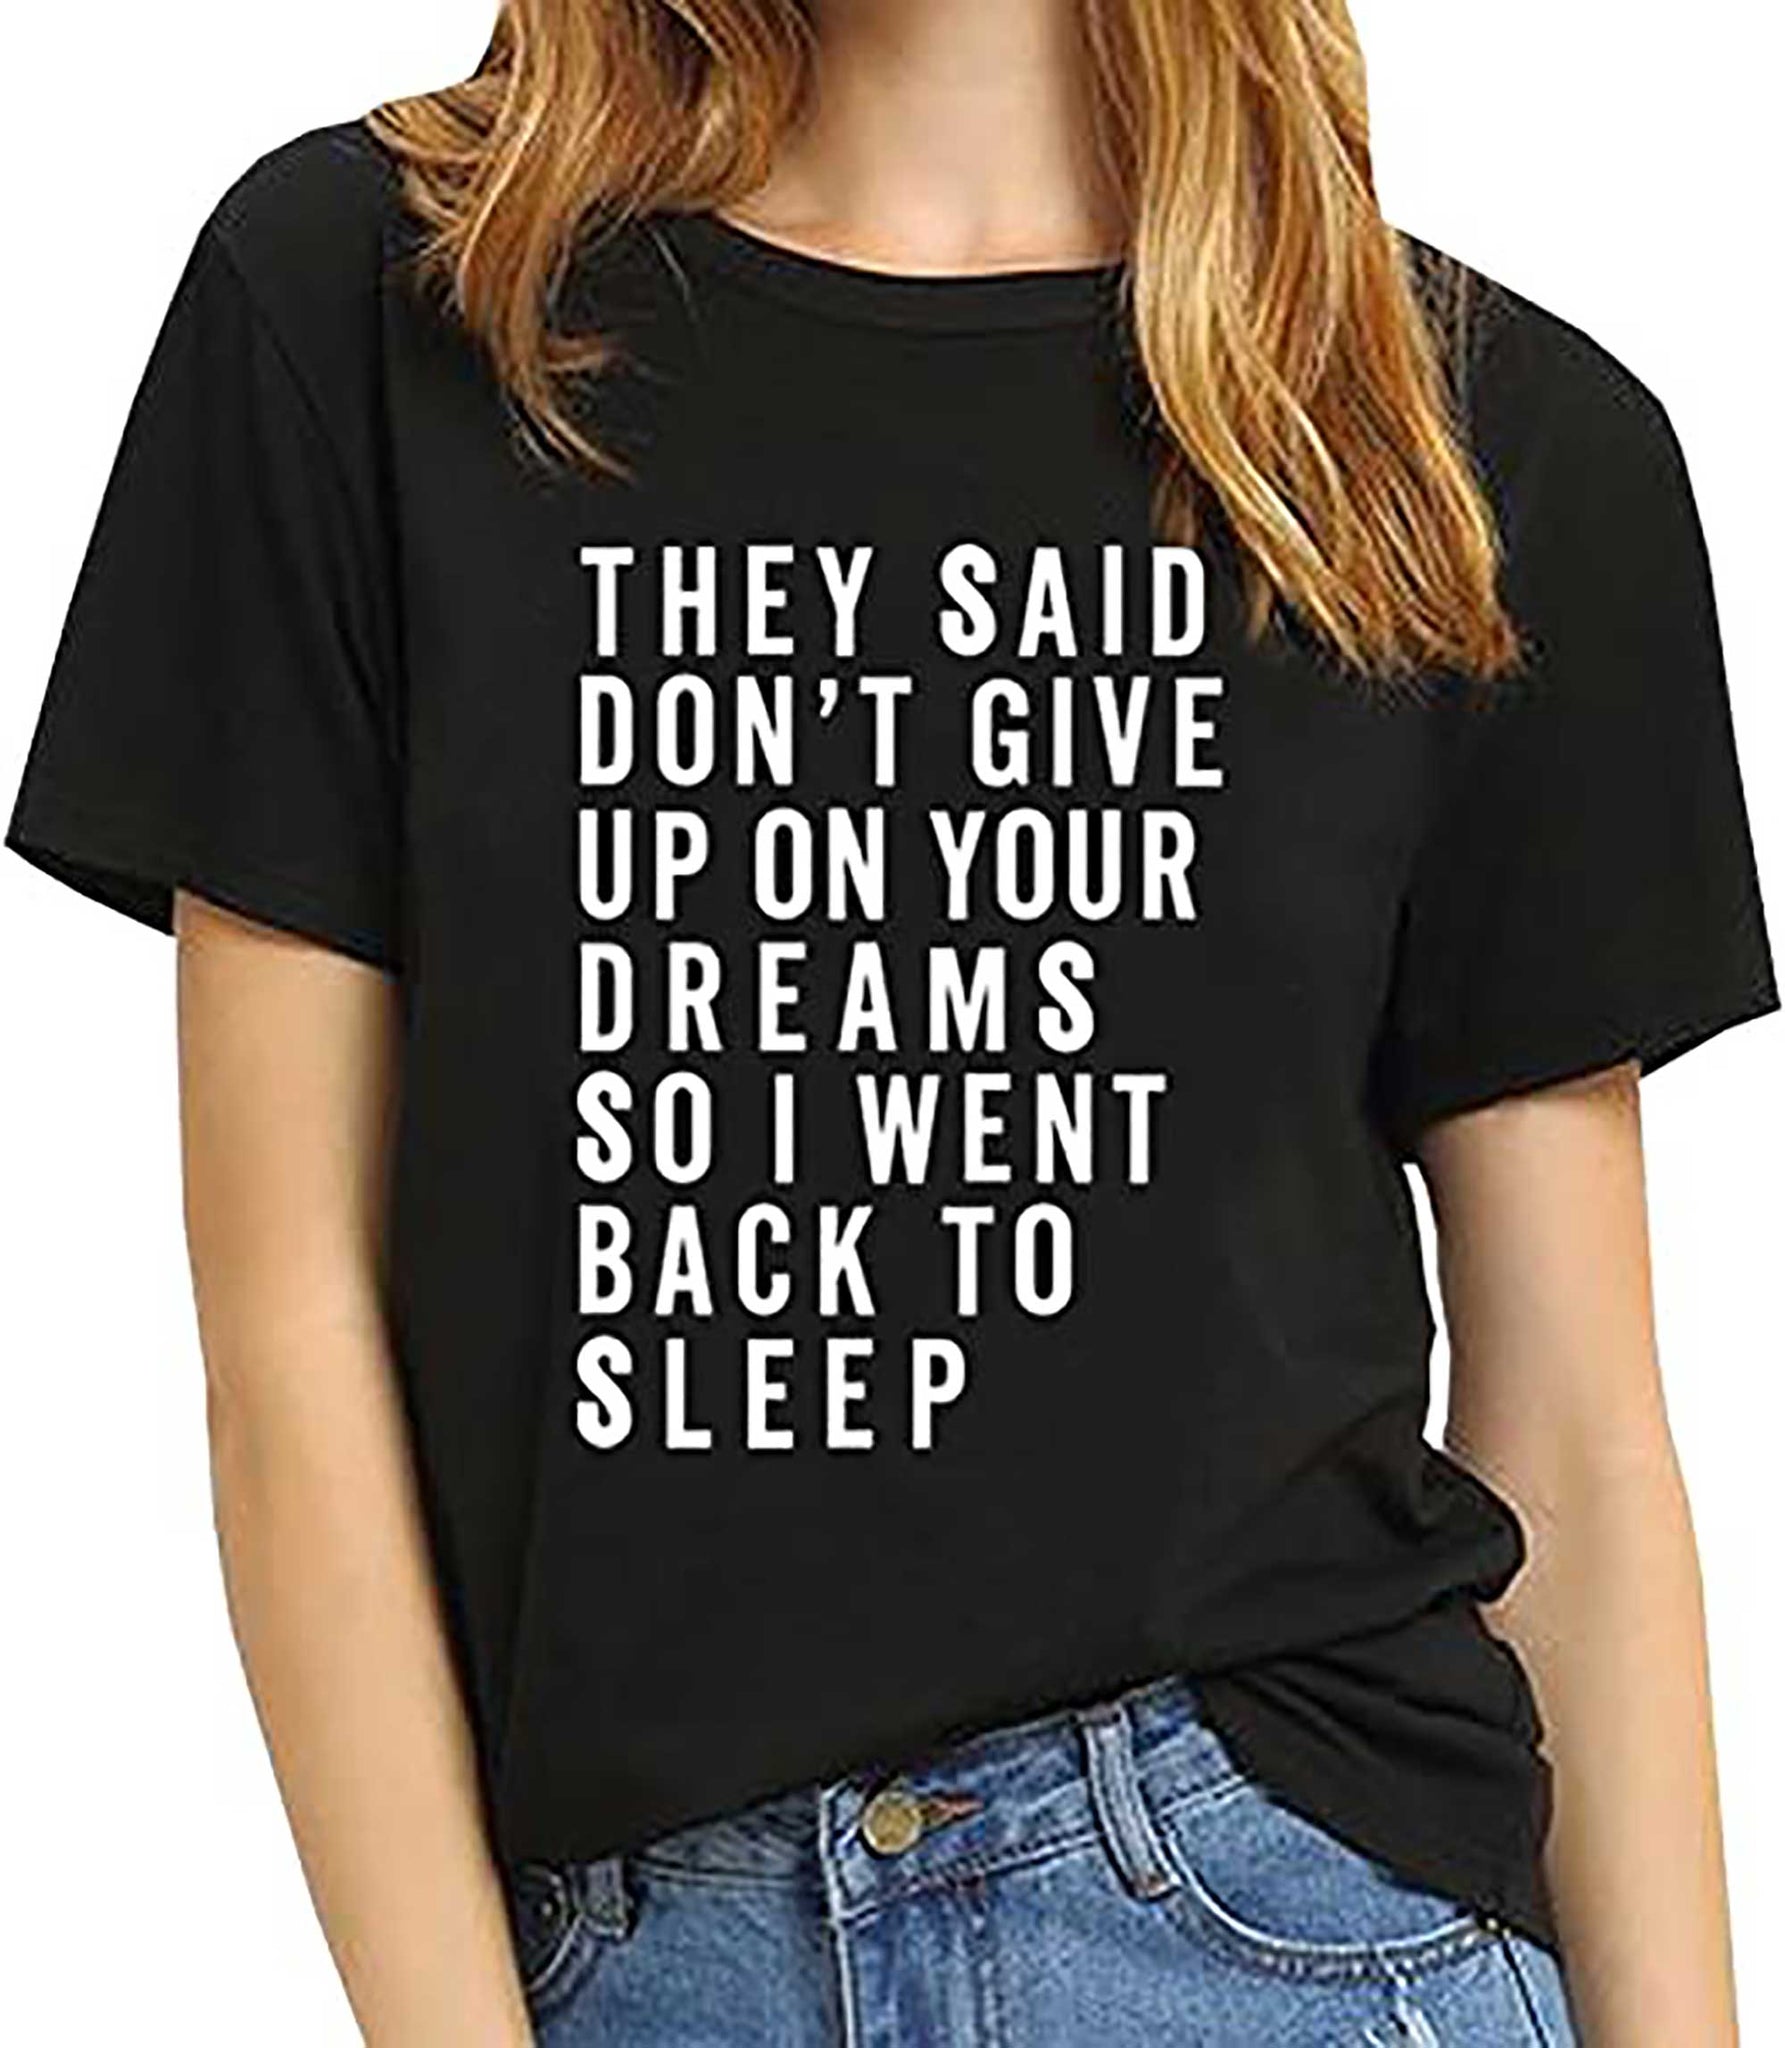 They Said Dont Give Up On Your Dreams So I Went Back To Sleep Grahpic Letter tee Shirt Fashion